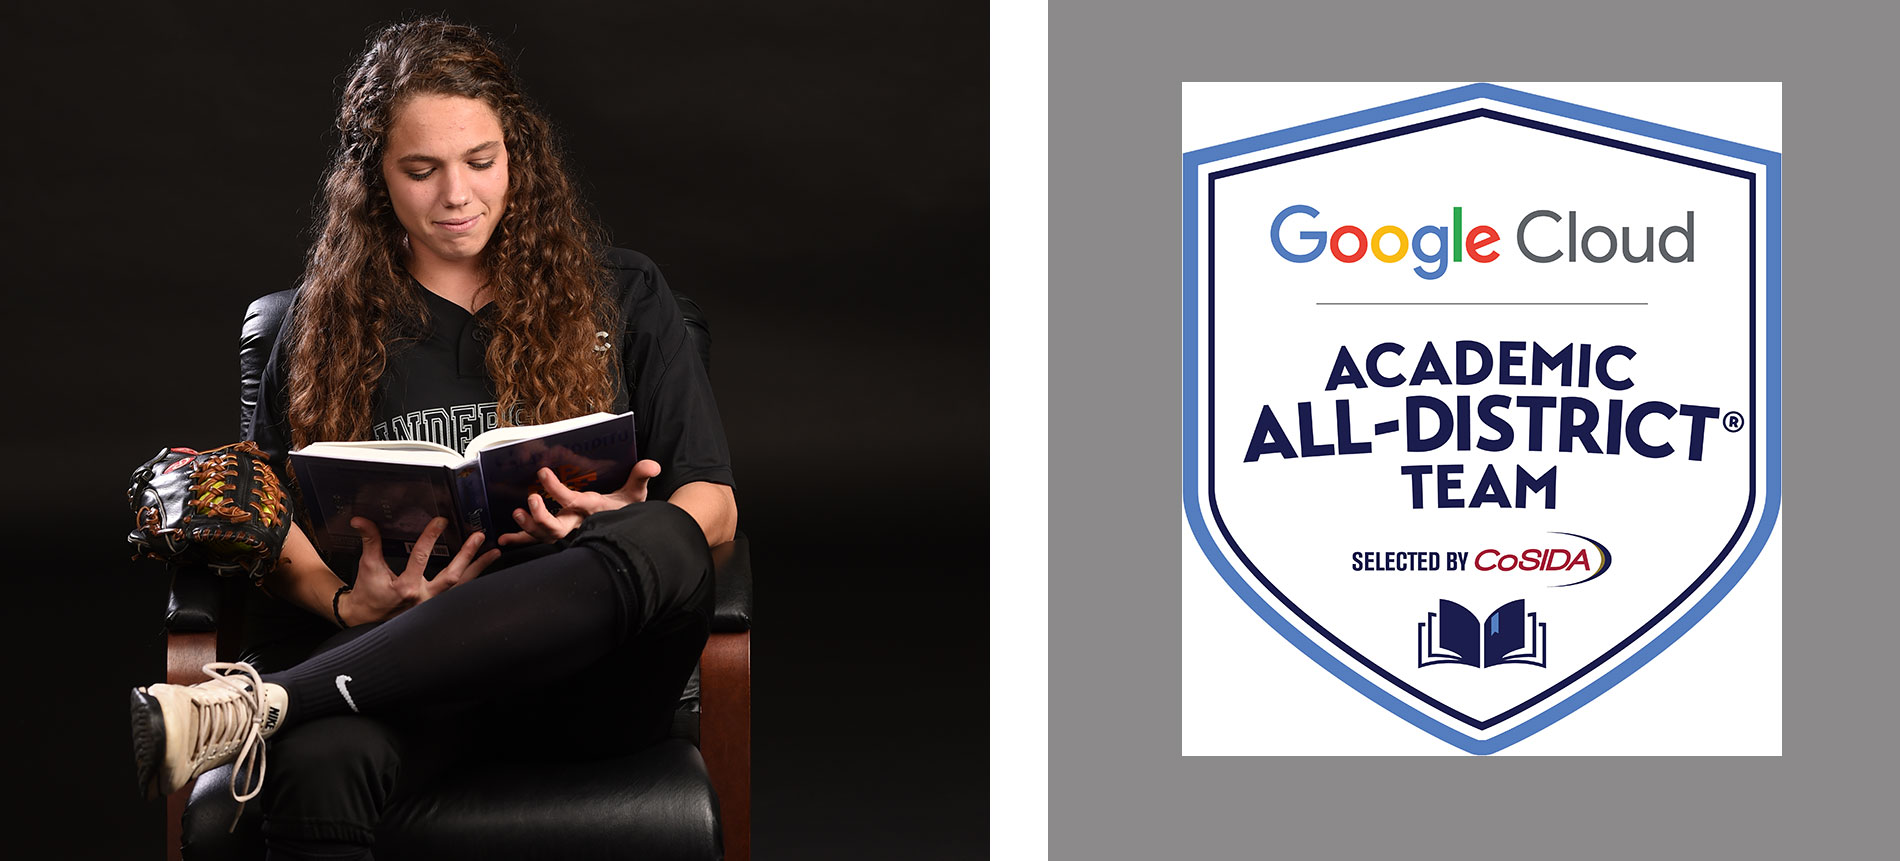 Grant Earns 2019 Google Cloud Academic All-District